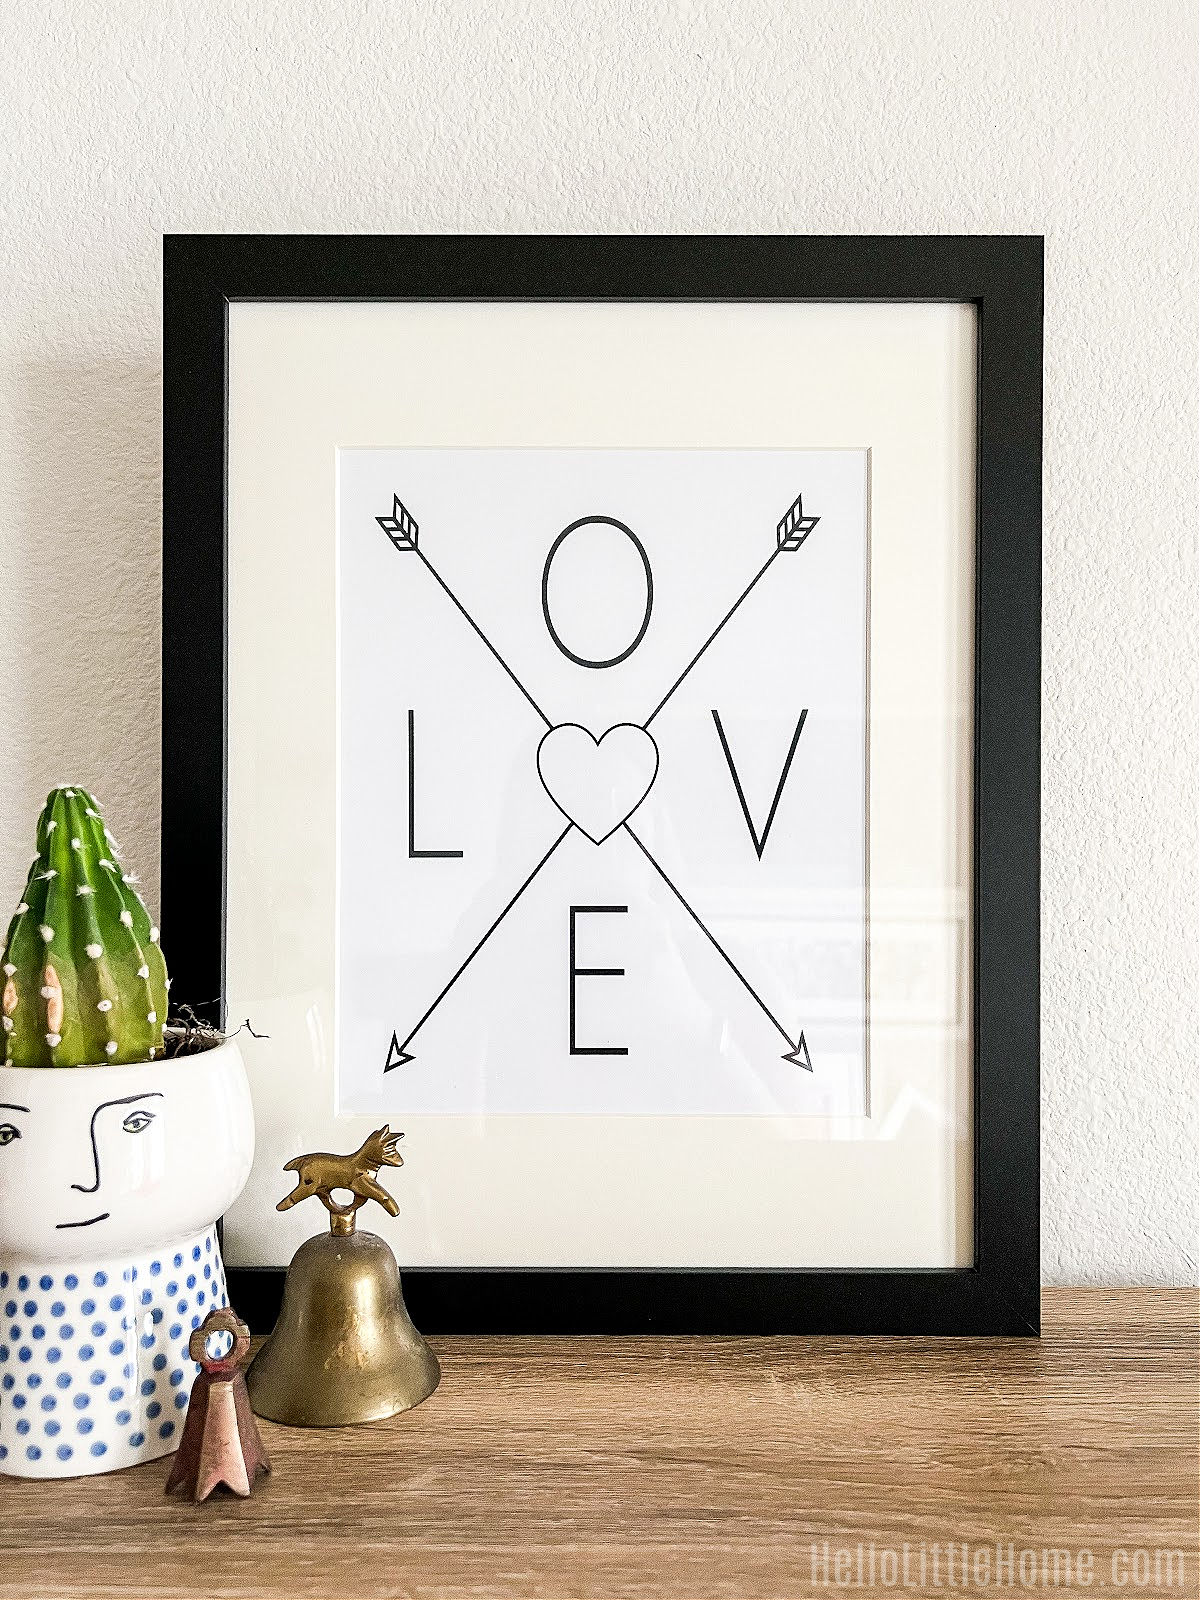 The love heart wall art in a black frame on a wood table.